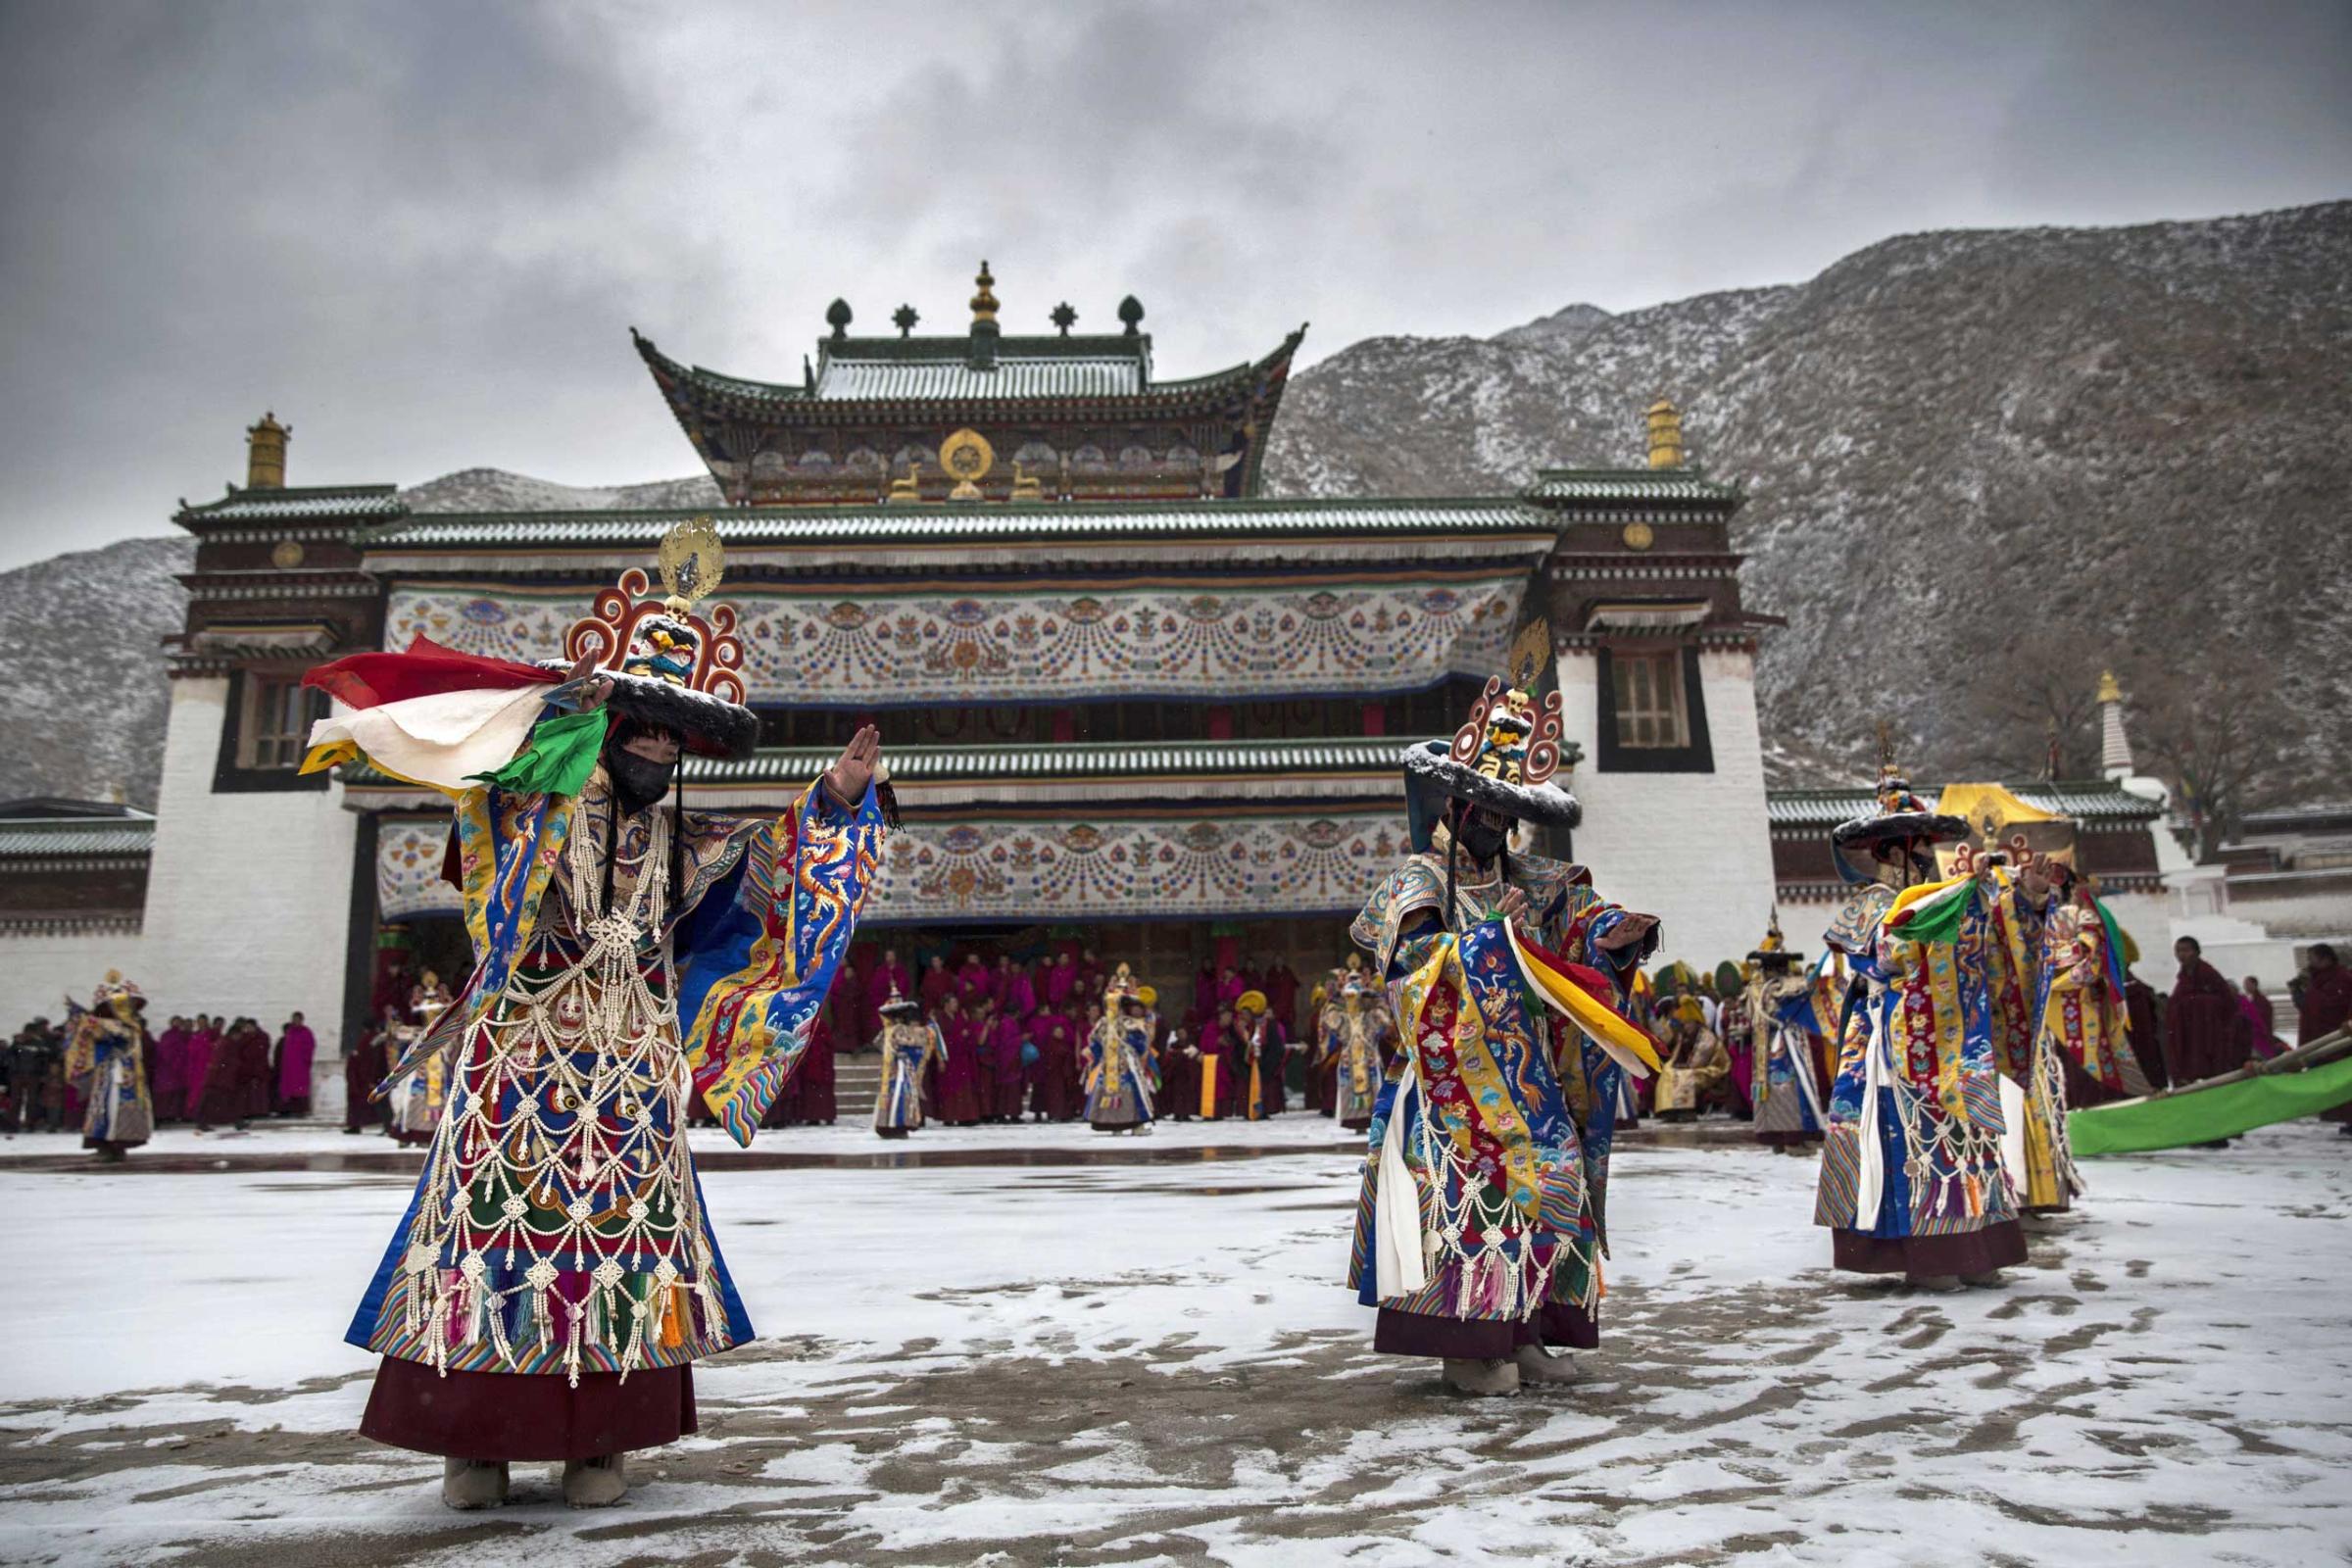 Tibetan Buddhist monks perform a black hat dance during Monlam or the Great Prayer rituals on March 4, 2015 at the Labrang Monastery.